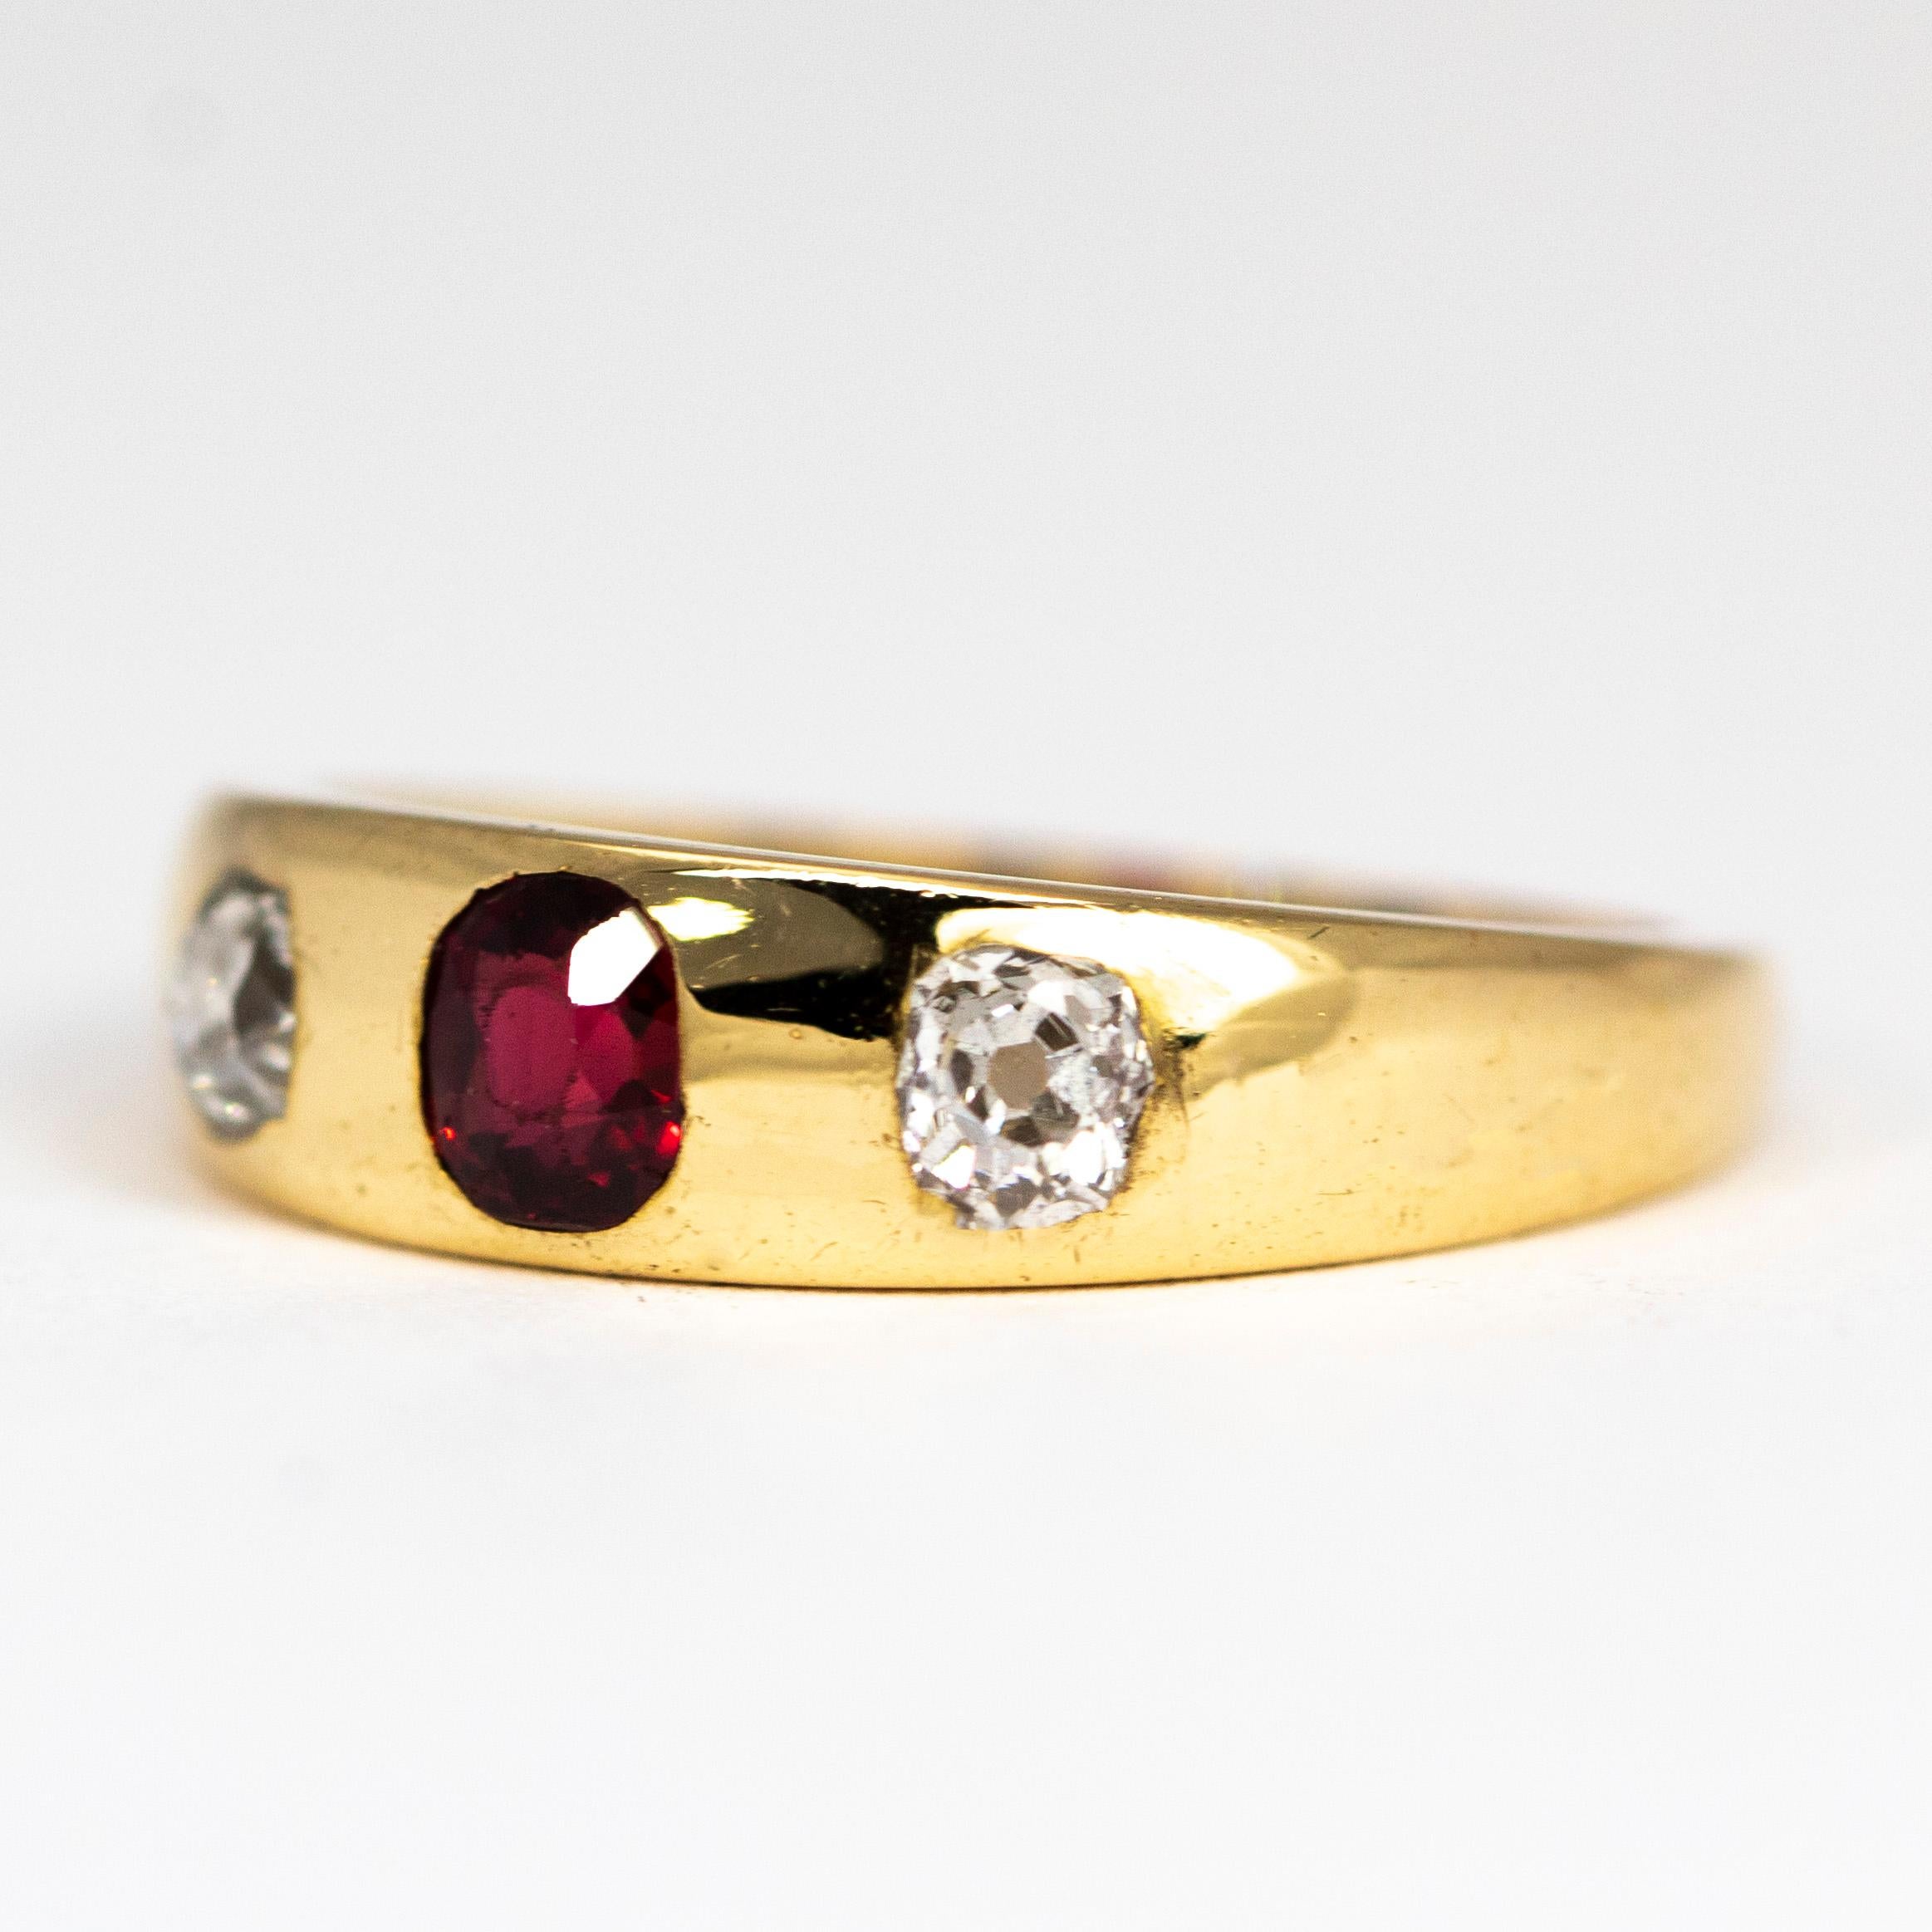 This stunning glossy gold band holds a fabulous deep red ruby measuring 30pts and either side of this stone sit a 20pt diamond which add a wonderful glistening aspect to the ring. The stones sit flush in the band 18ct gold. 

Ring Size: L 1/2 or 6